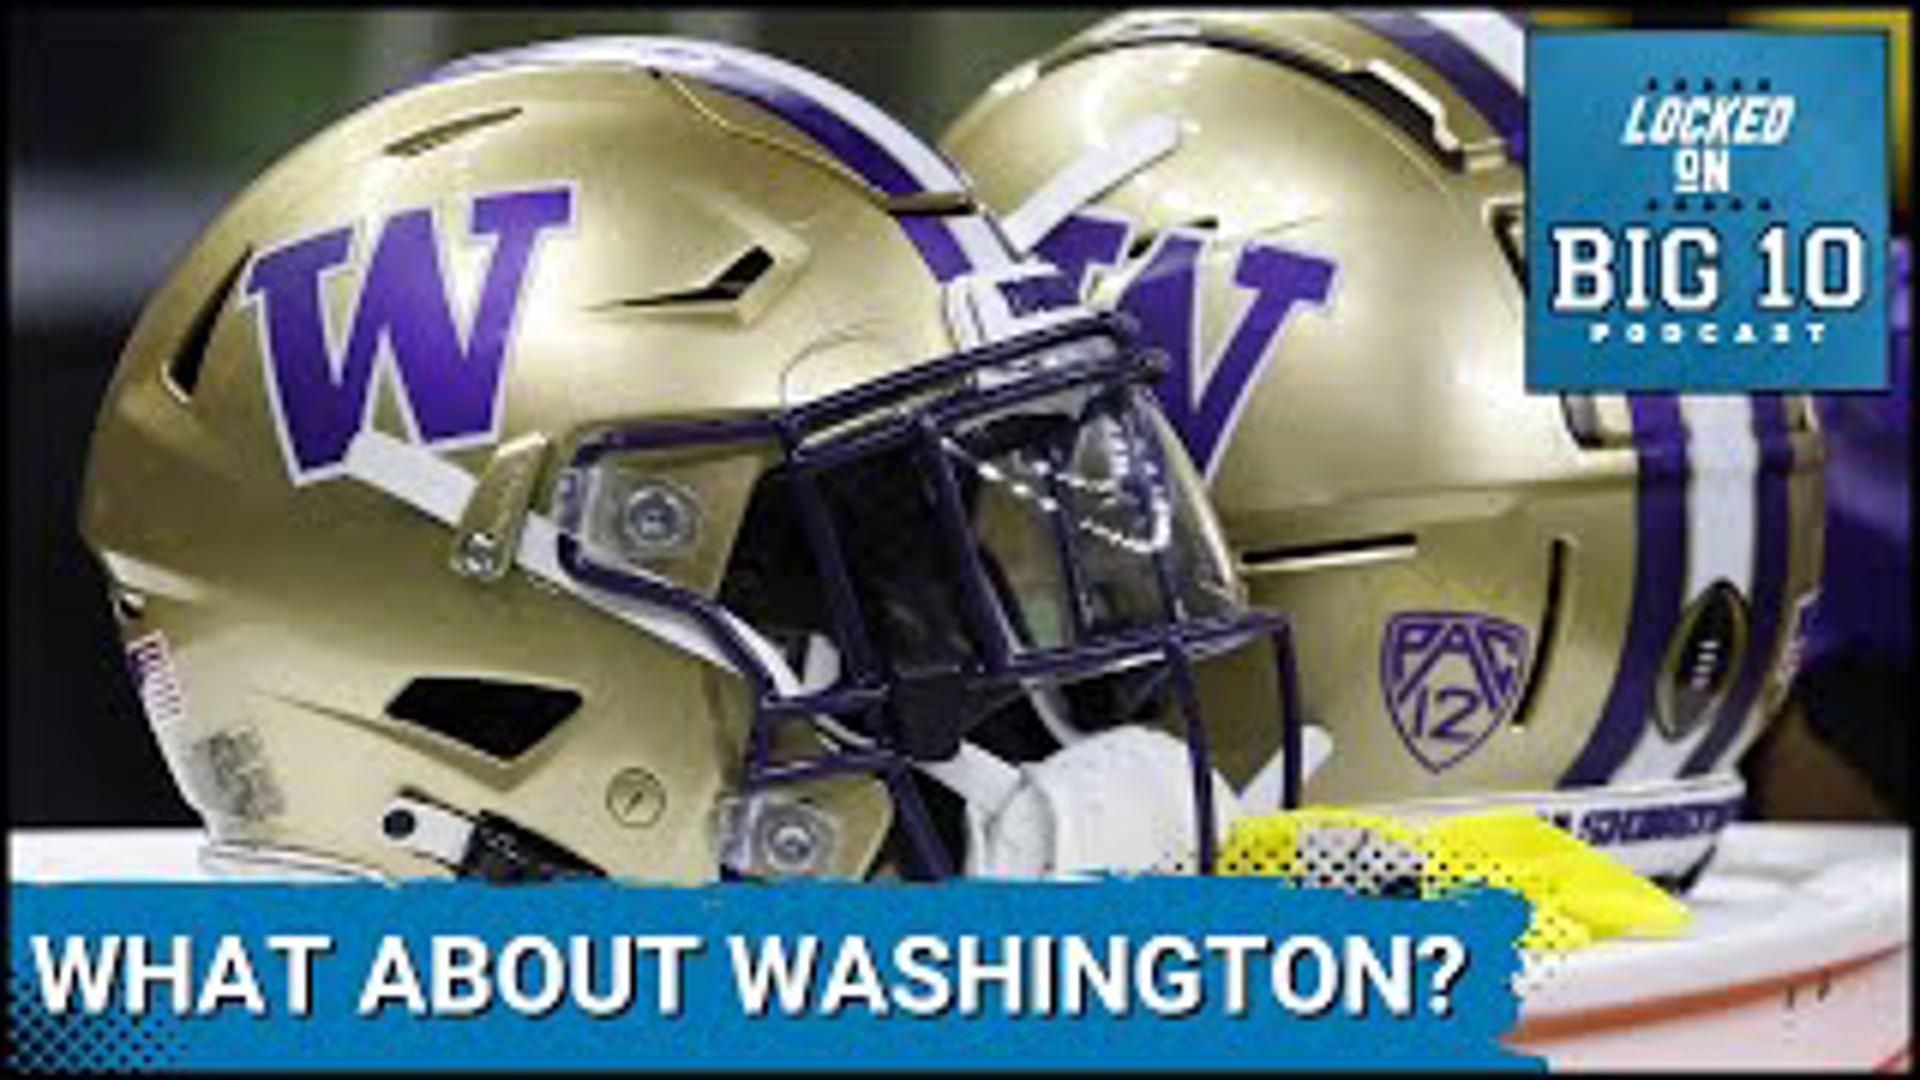 The Washington Huskies made the college football playoff championship game last year.  And yet Washington football is the most mysterious team in the Big Ten.